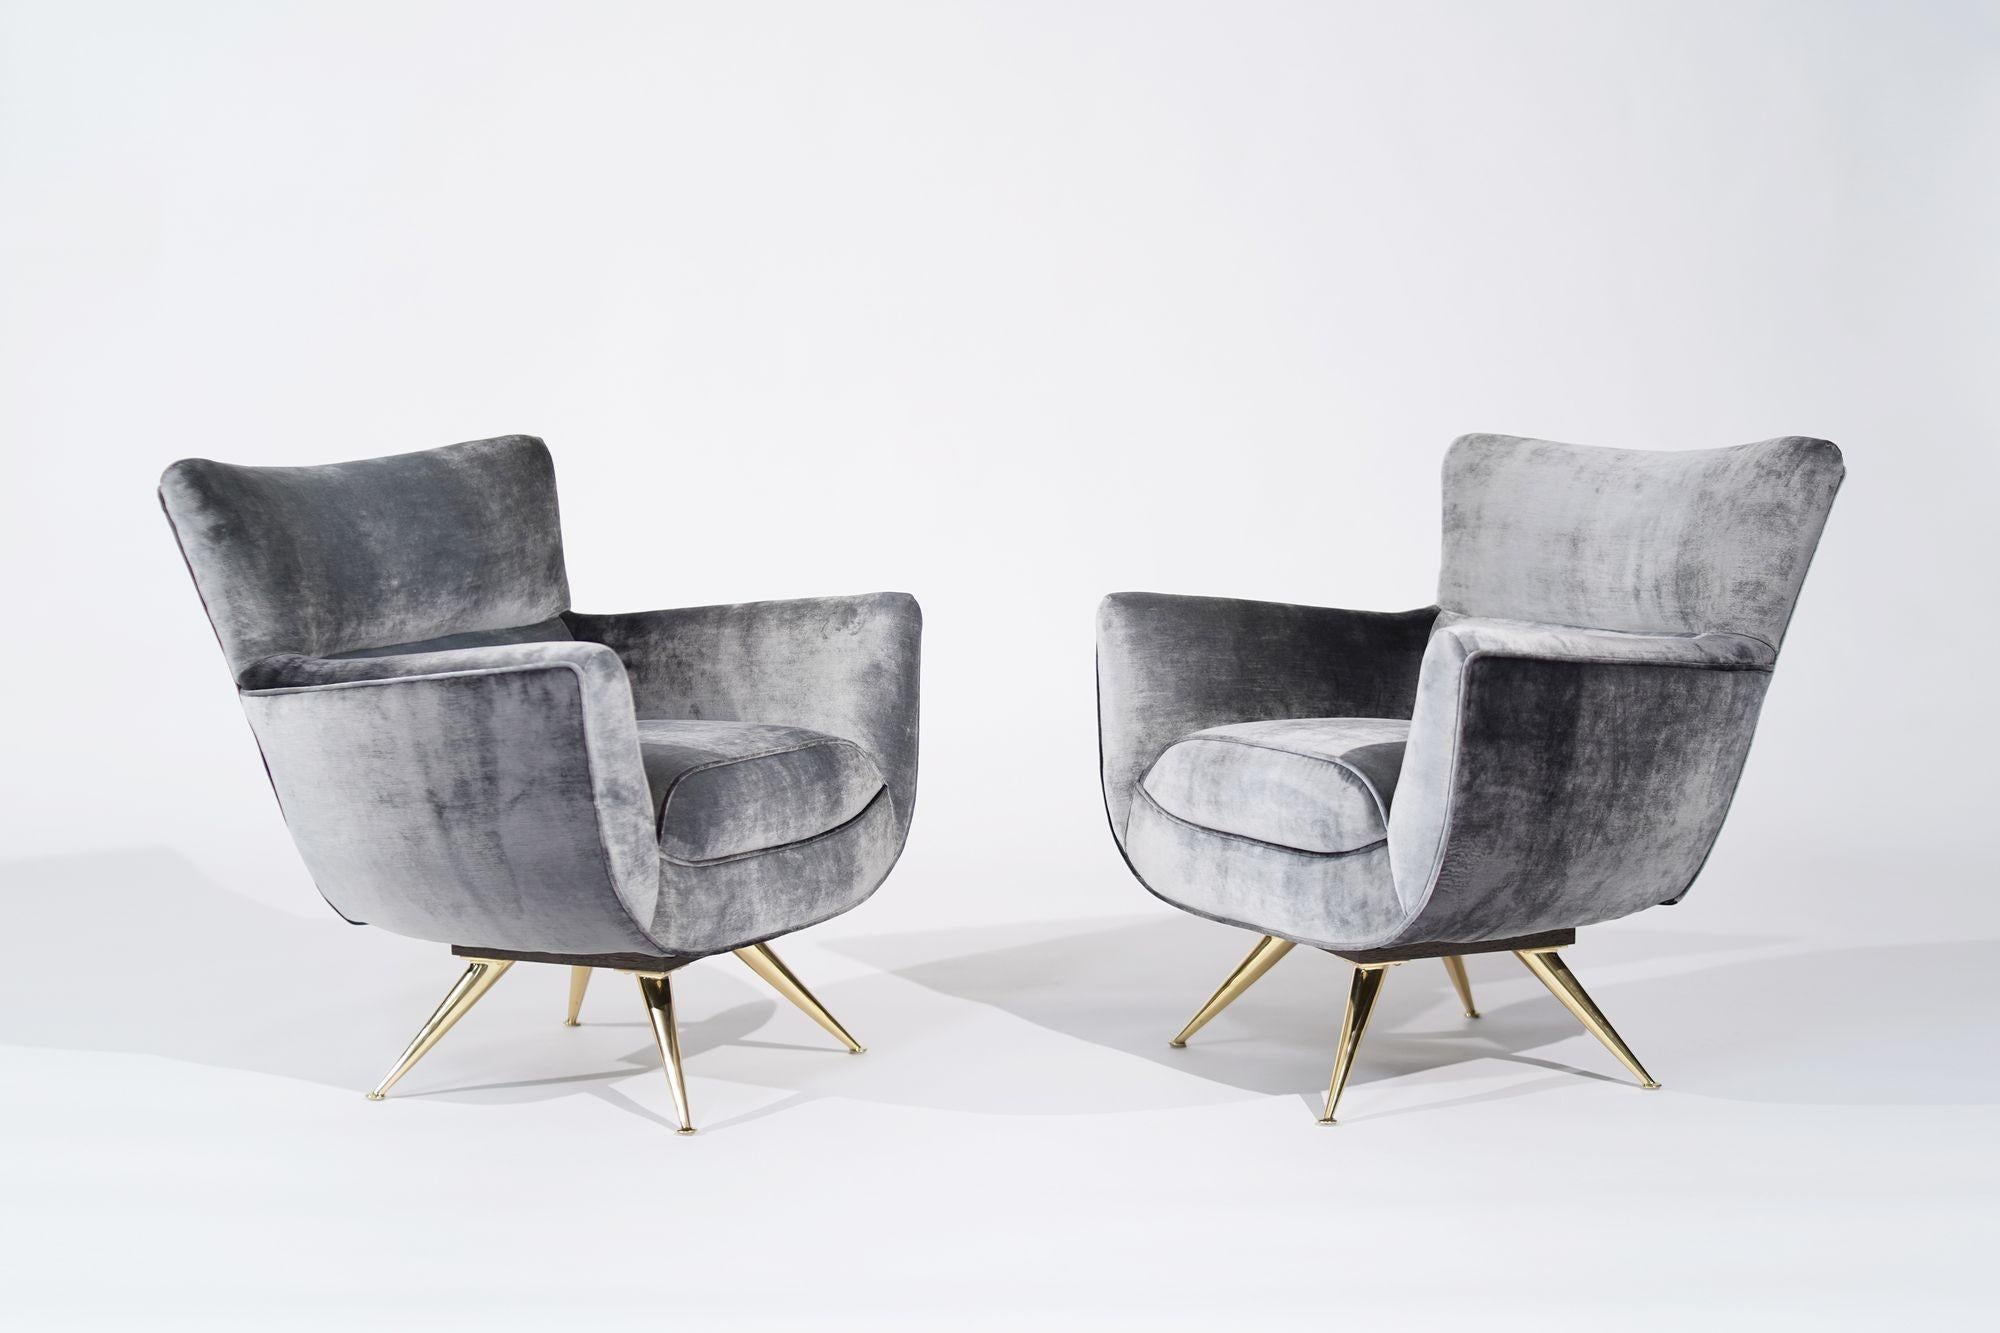 American Henry Glass Swivel Chairs in Distressed Silver Velvet, C. 1950s For Sale